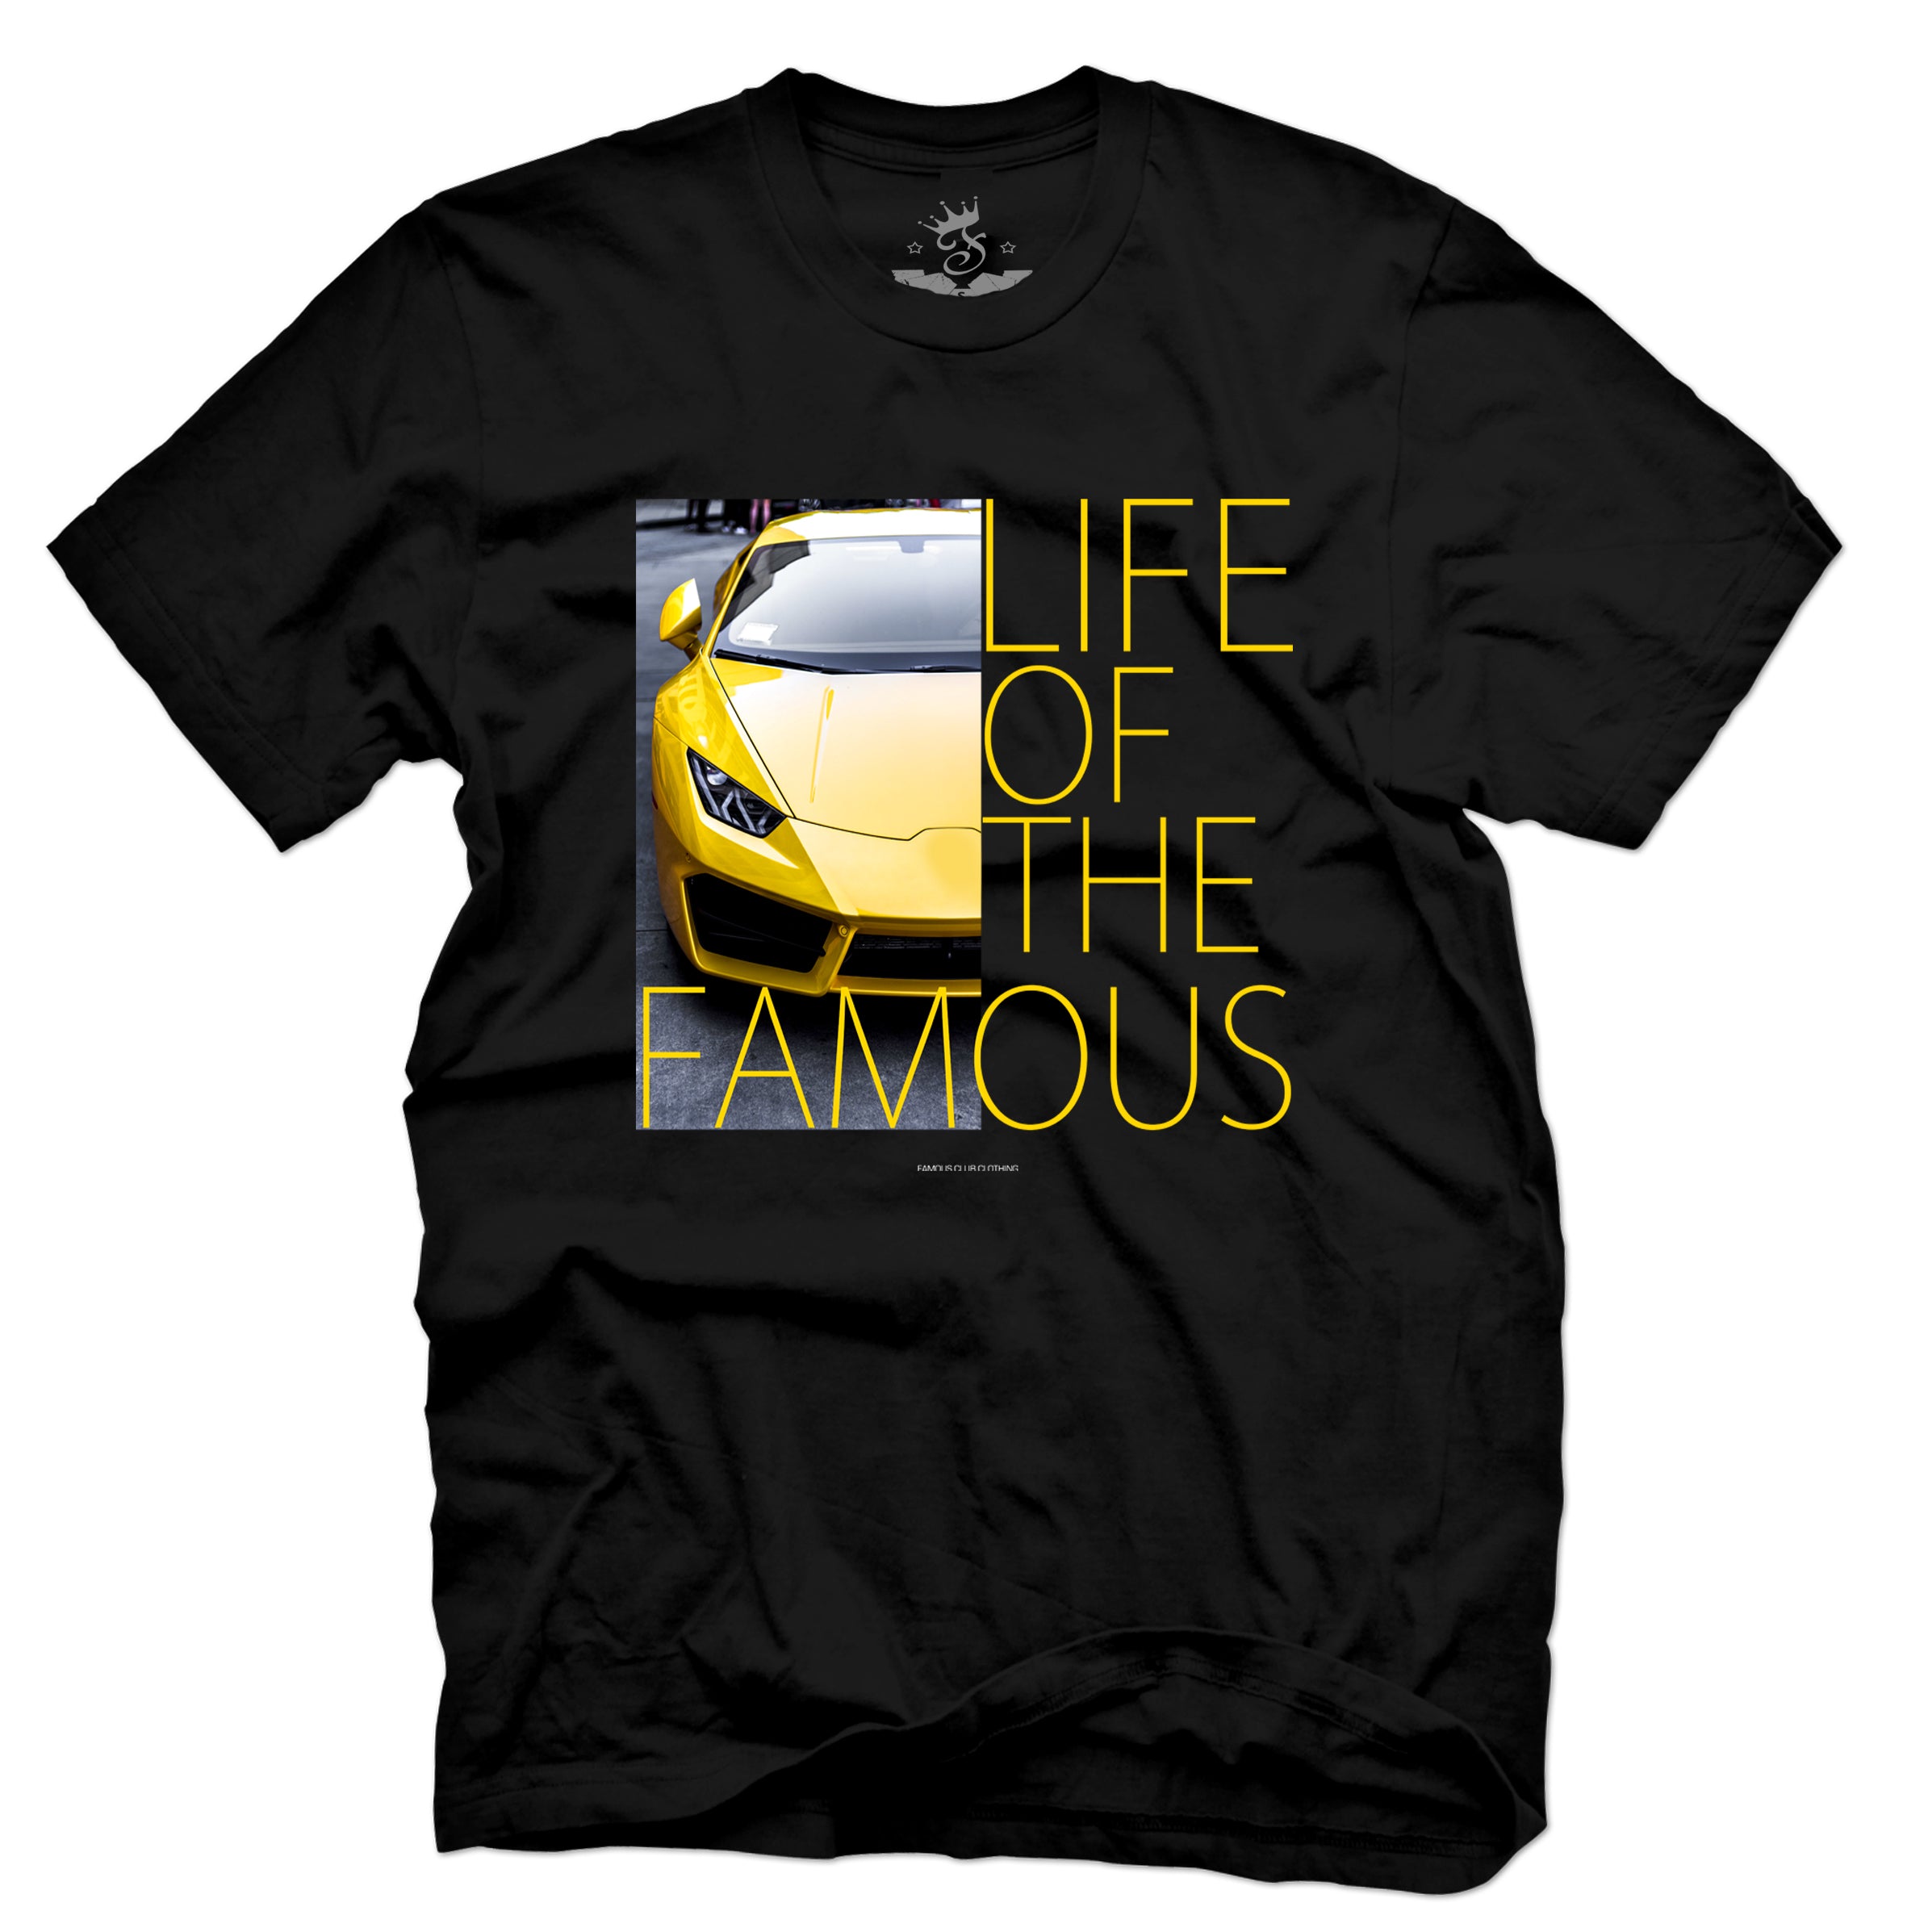 LIFE OF THE FAMOUS TEE - BLACK